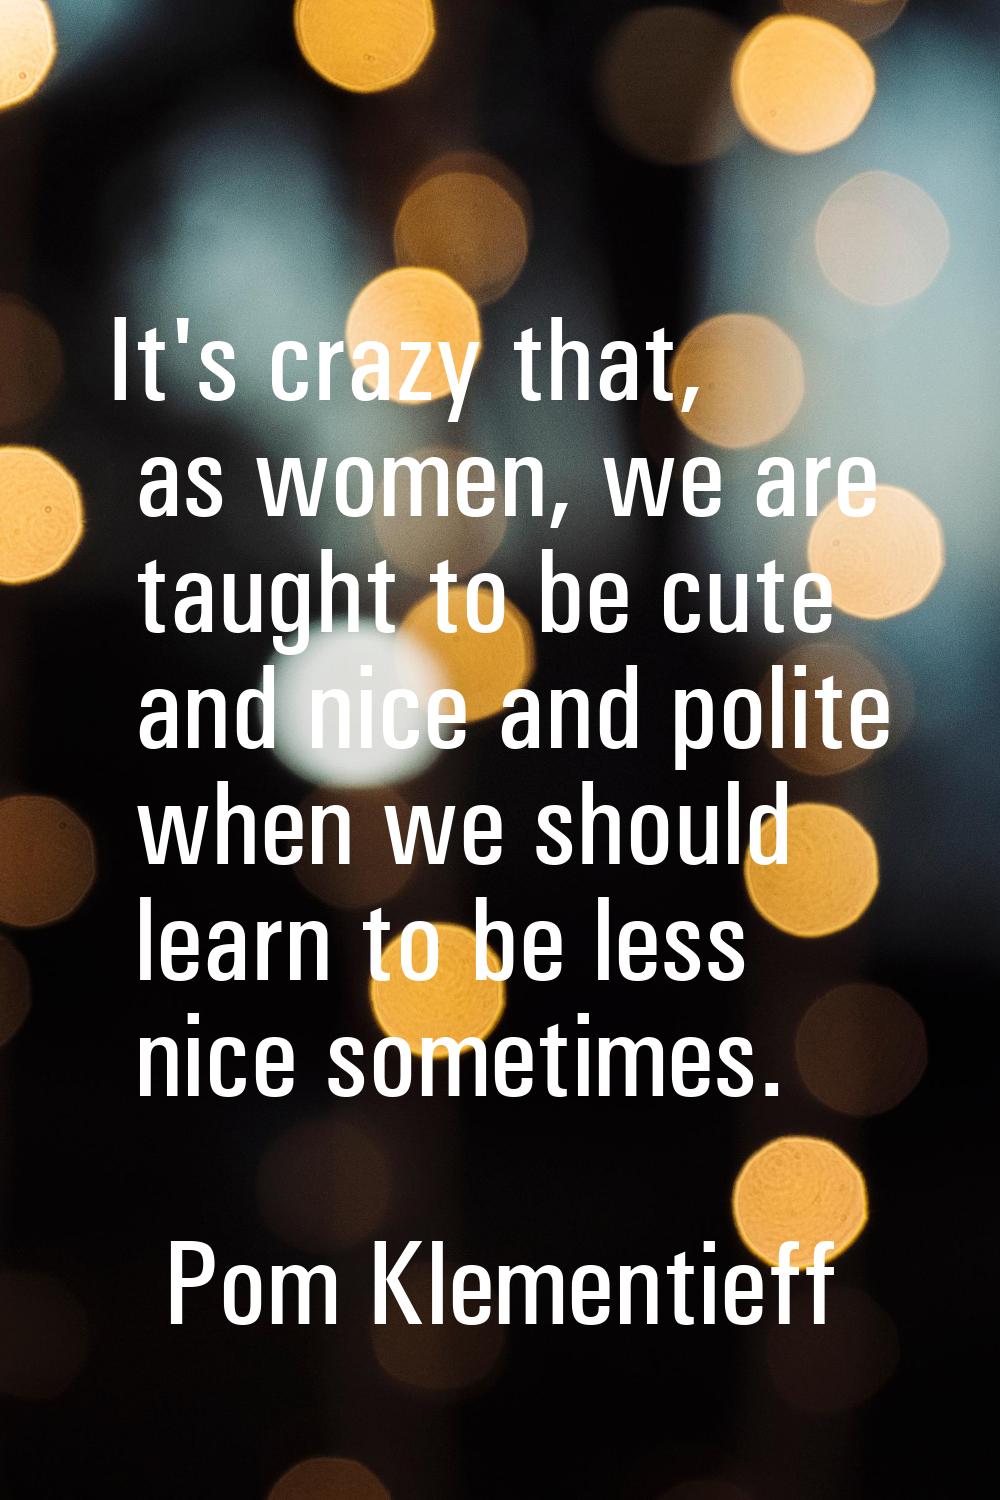 It's crazy that, as women, we are taught to be cute and nice and polite when we should learn to be 